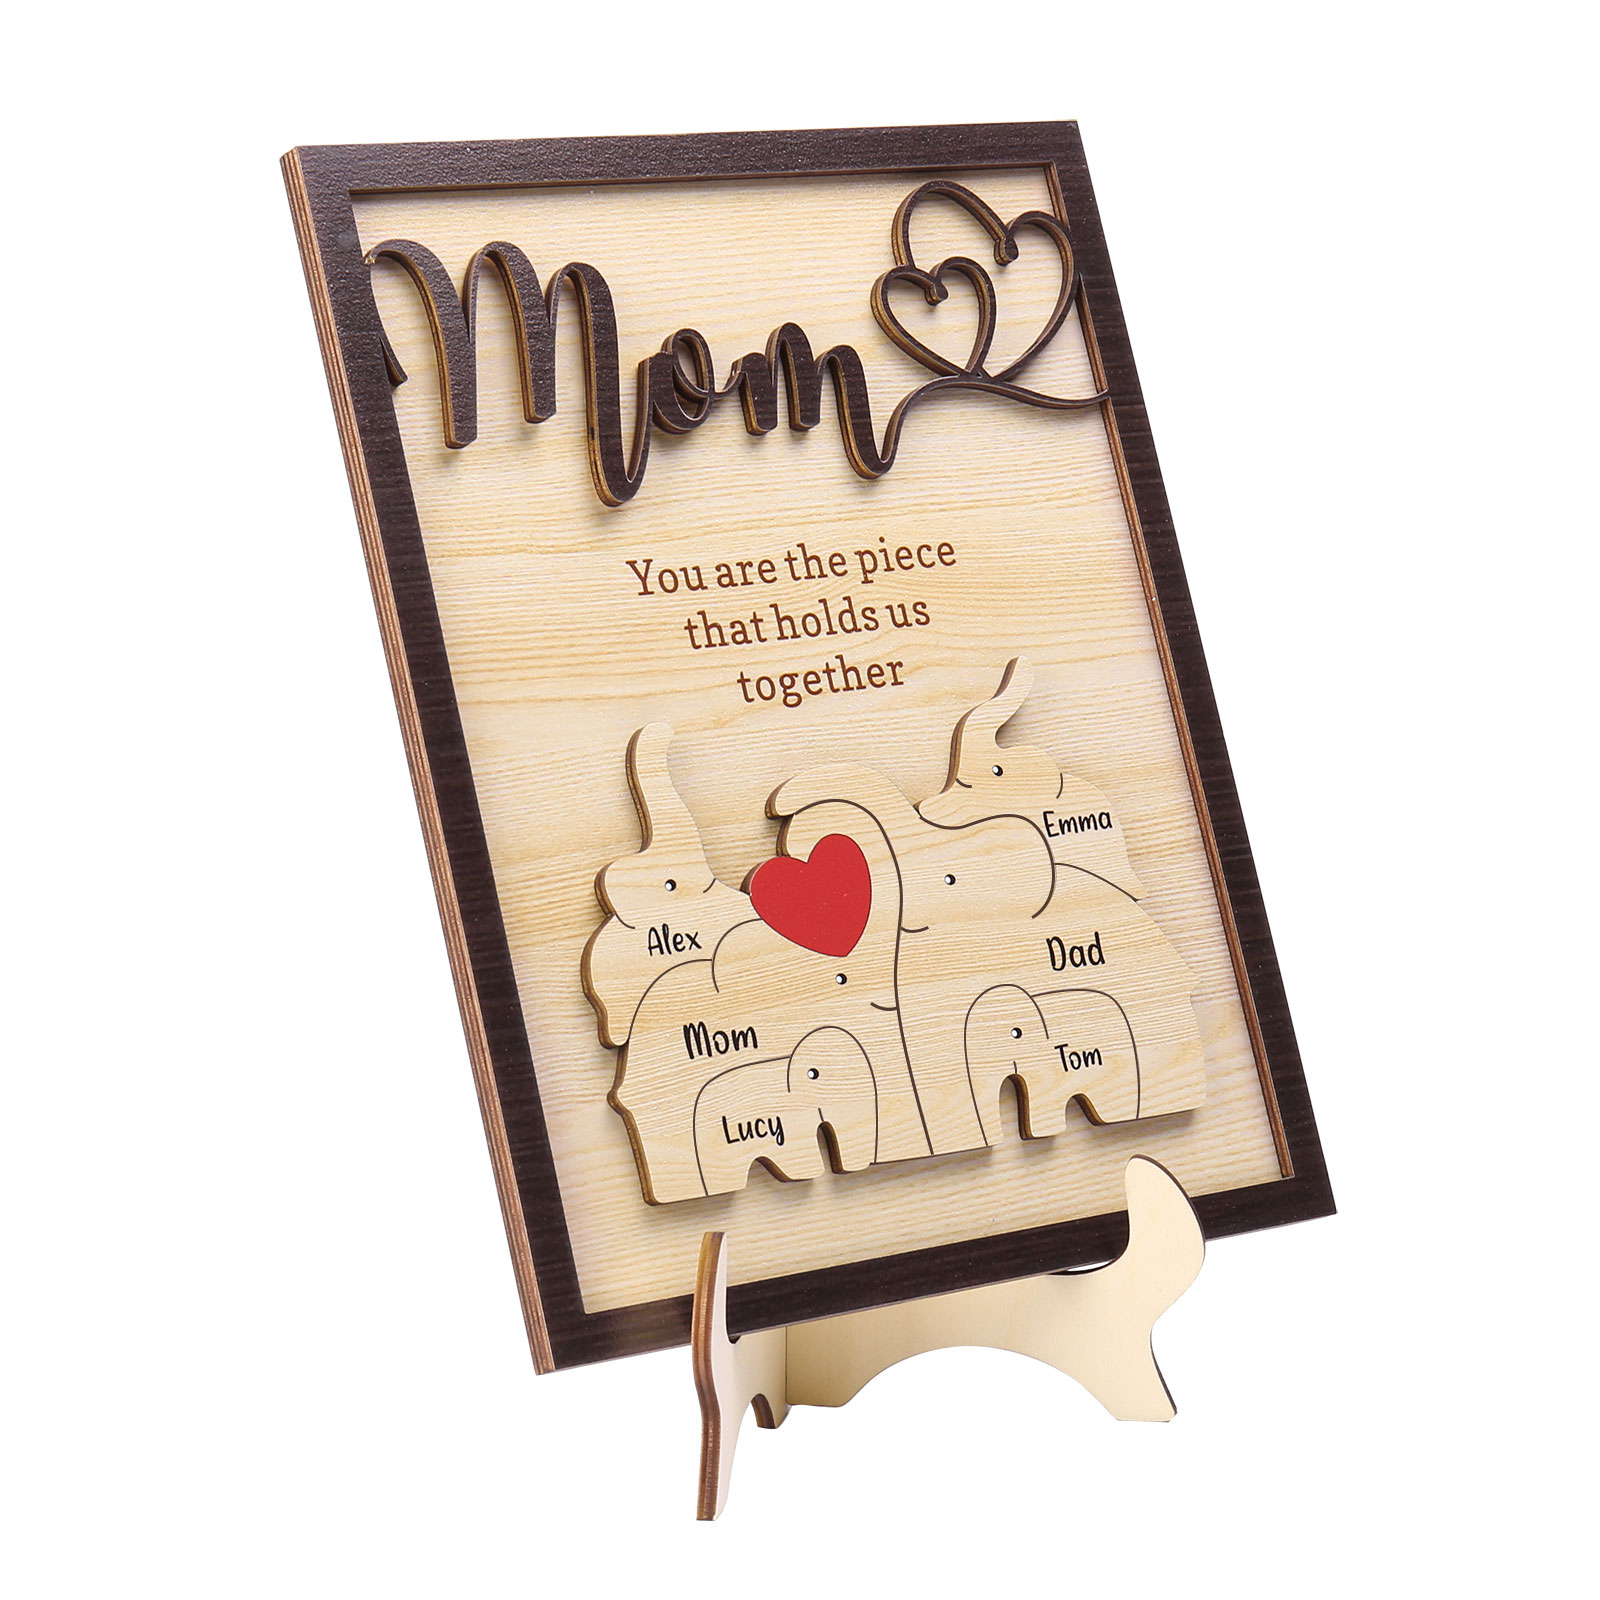 6 Names - Personalized Cute Elephant Style Home Frame Wooden Ornament with Customizable Calling and Text for Mom